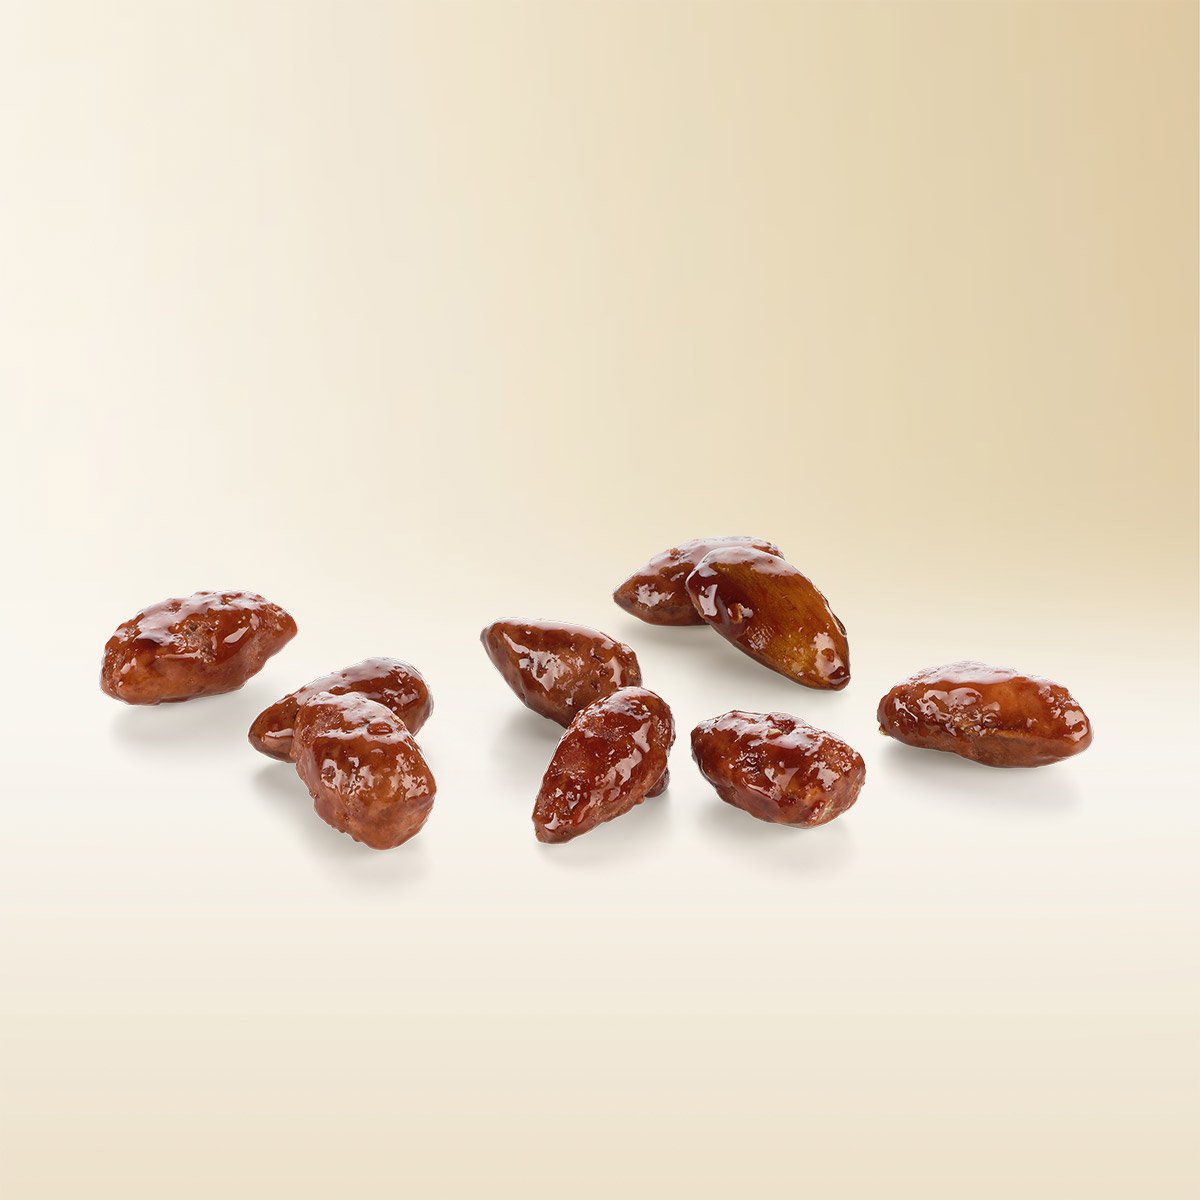 Roasted almonds 150g